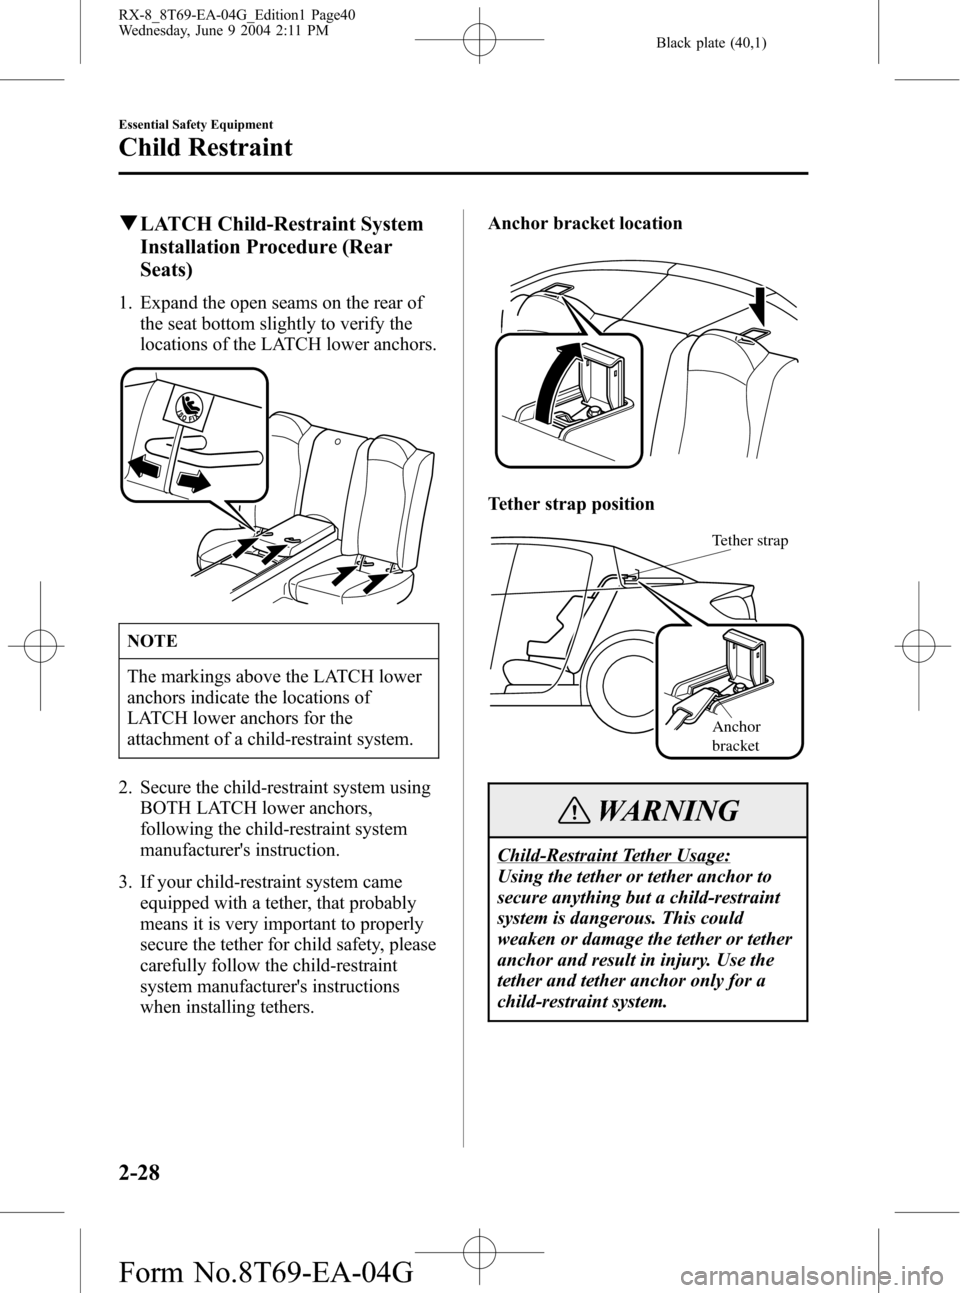 MAZDA MODEL RX 8 2005  Owners Manual (in English) Black plate (40,1)
qLATCH Child-Restraint System
Installation Procedure (Rear
Seats)
1. Expand the open seams on the rear of
the seat bottom slightly to verify the
locations of the LATCH lower anchors